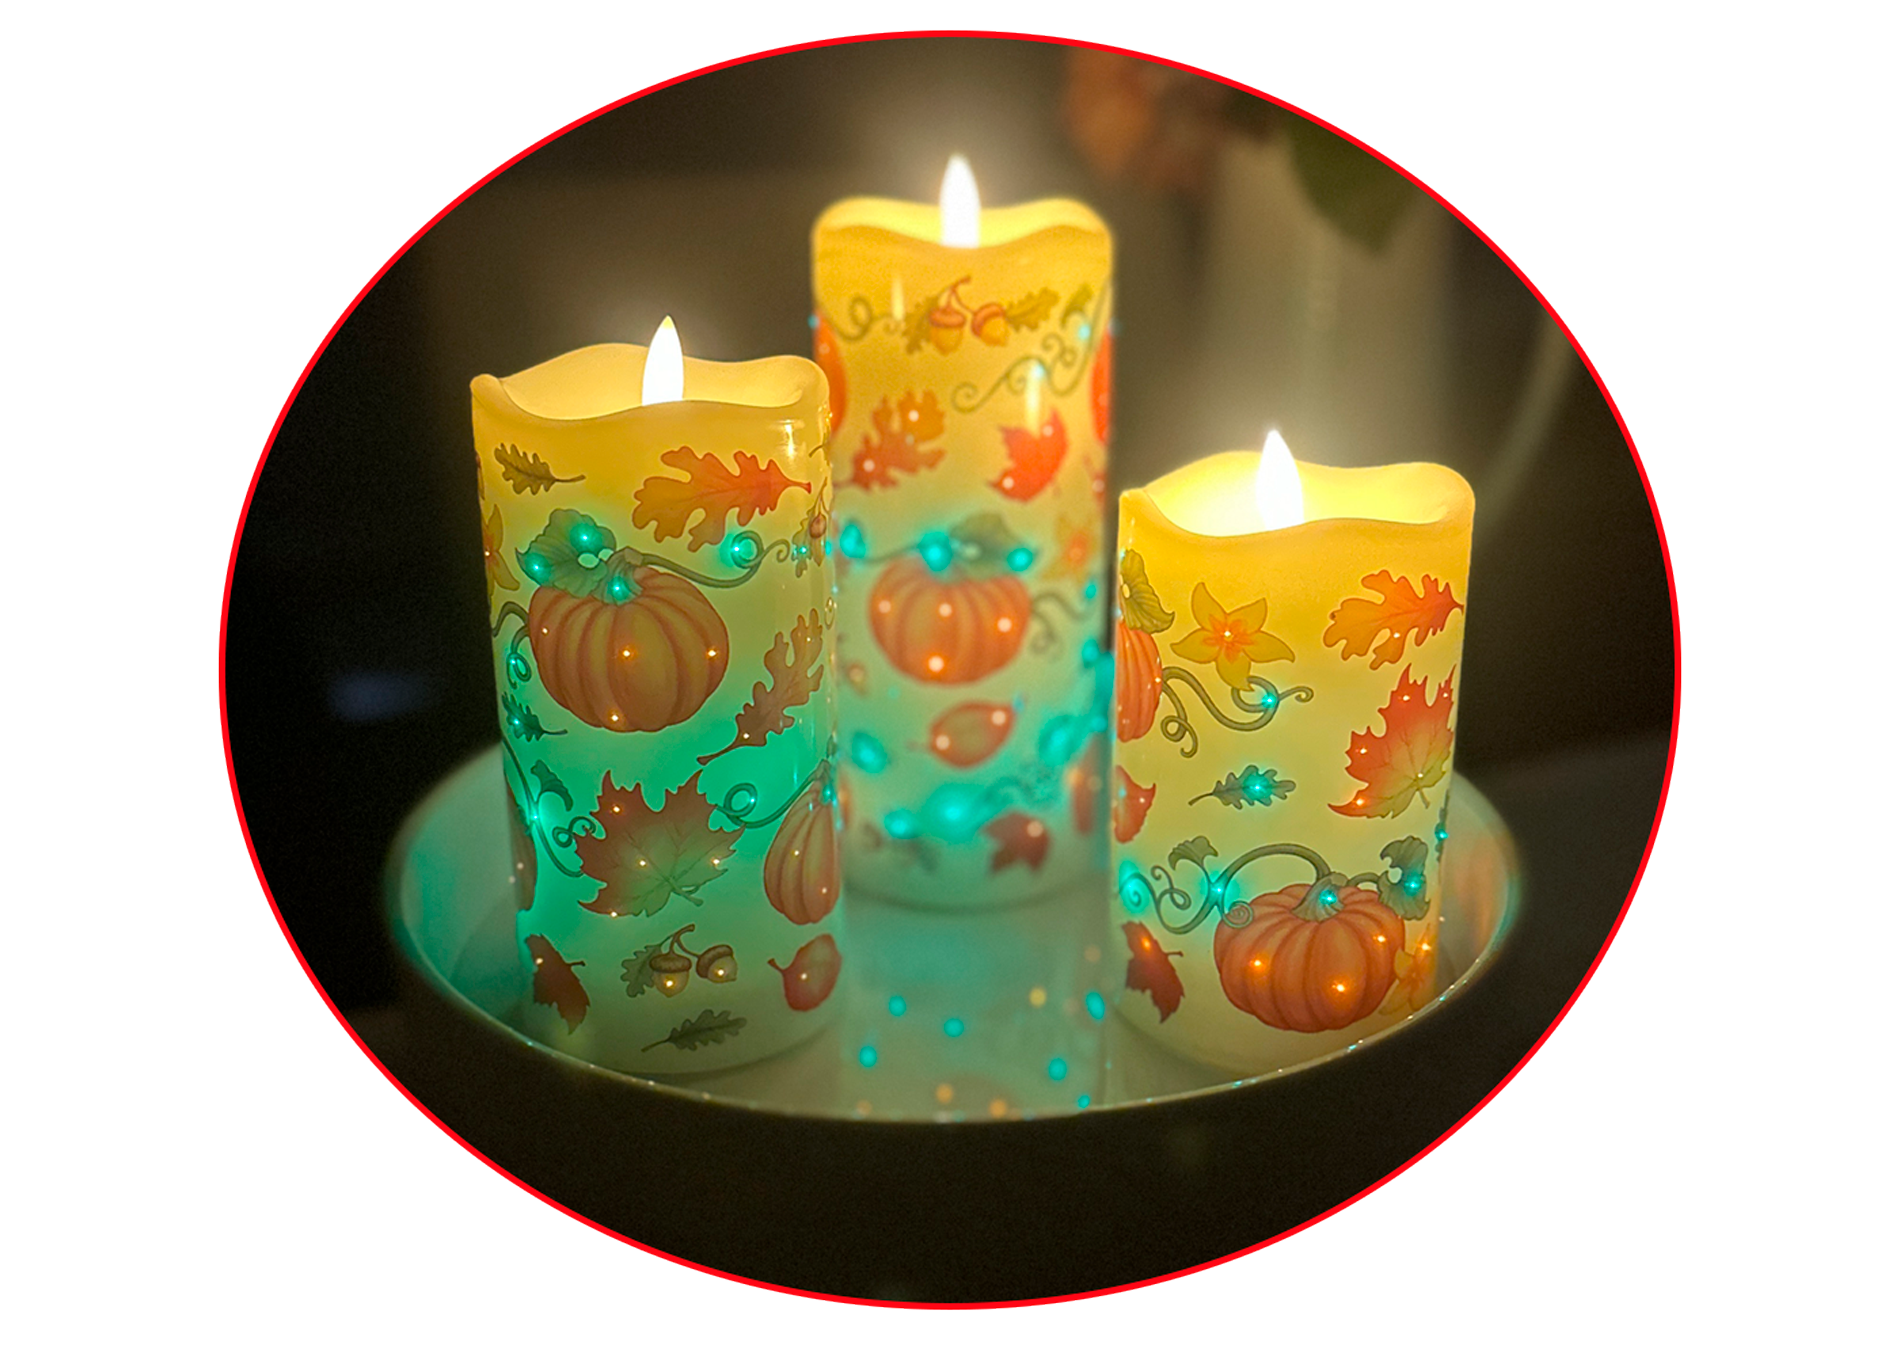 Temp-tations Fiber Optic Flameless Candles in Harvest pattern